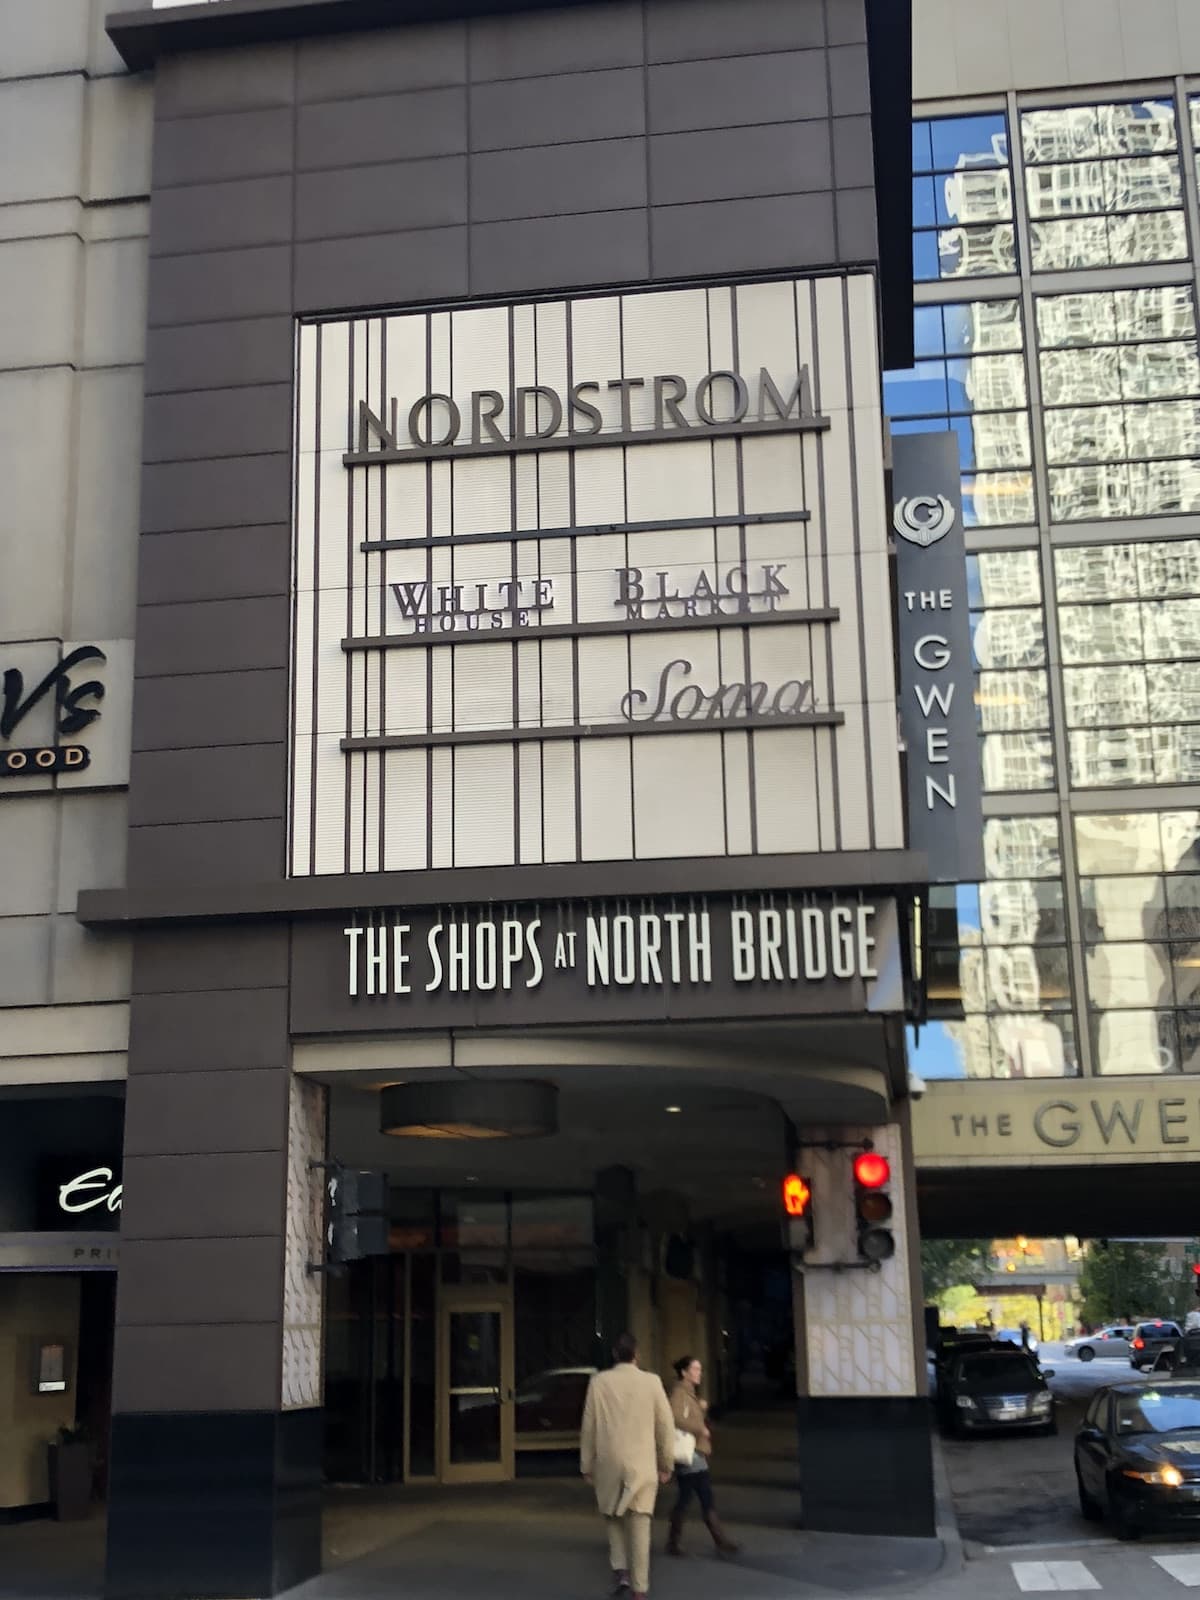 Enjoy Illinois: Exploring Chicago and the Magnificent Mile - The Shops at Northbridge